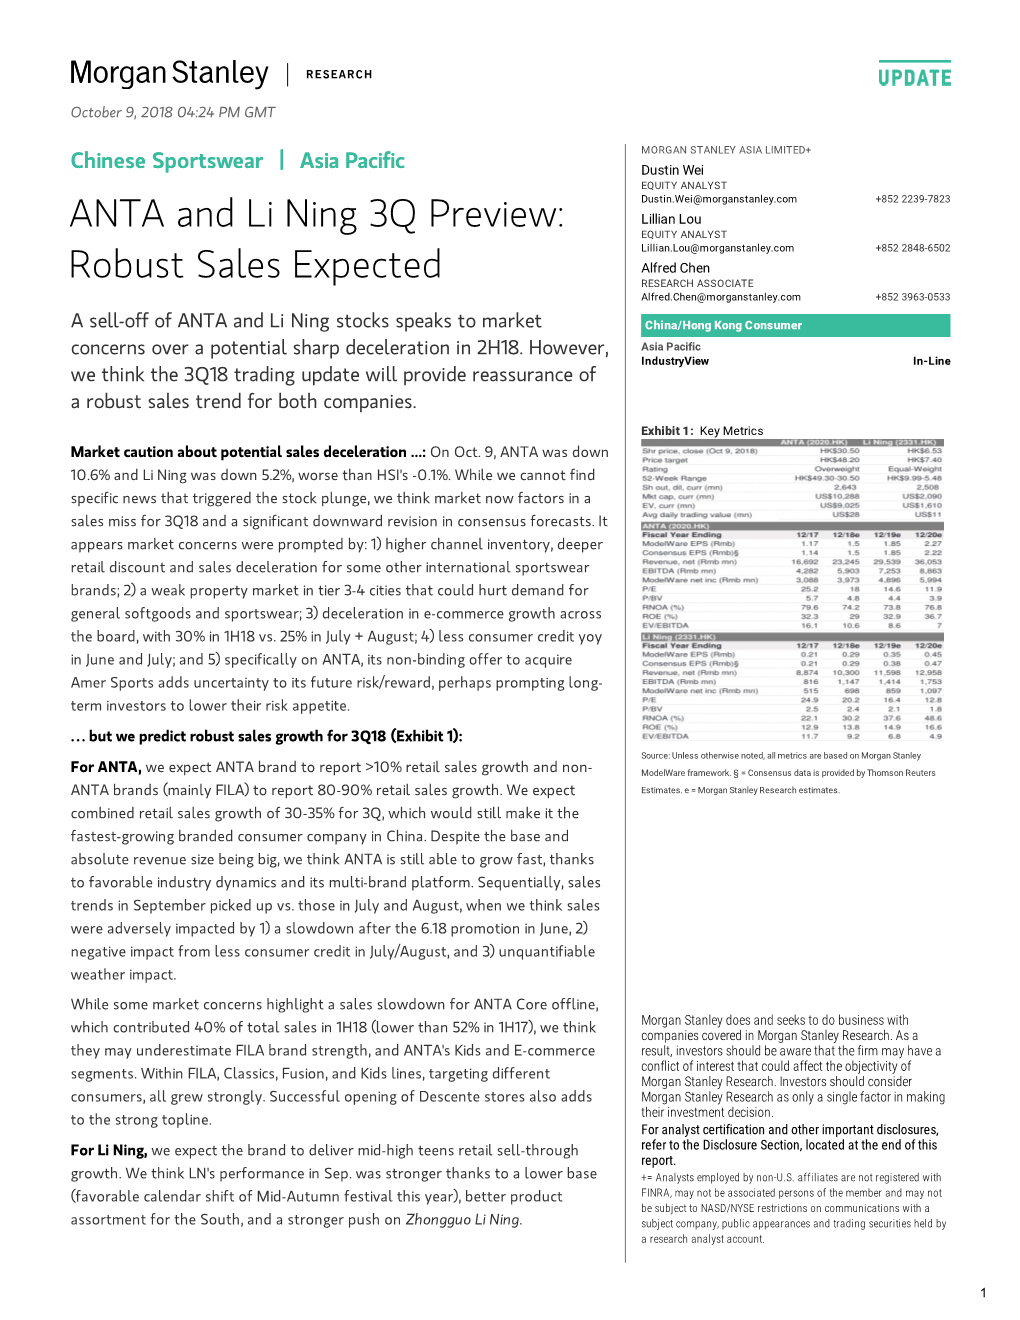 Chinese Sportswear: ANTA and Li Ning 3Q Preview: Robust Sales